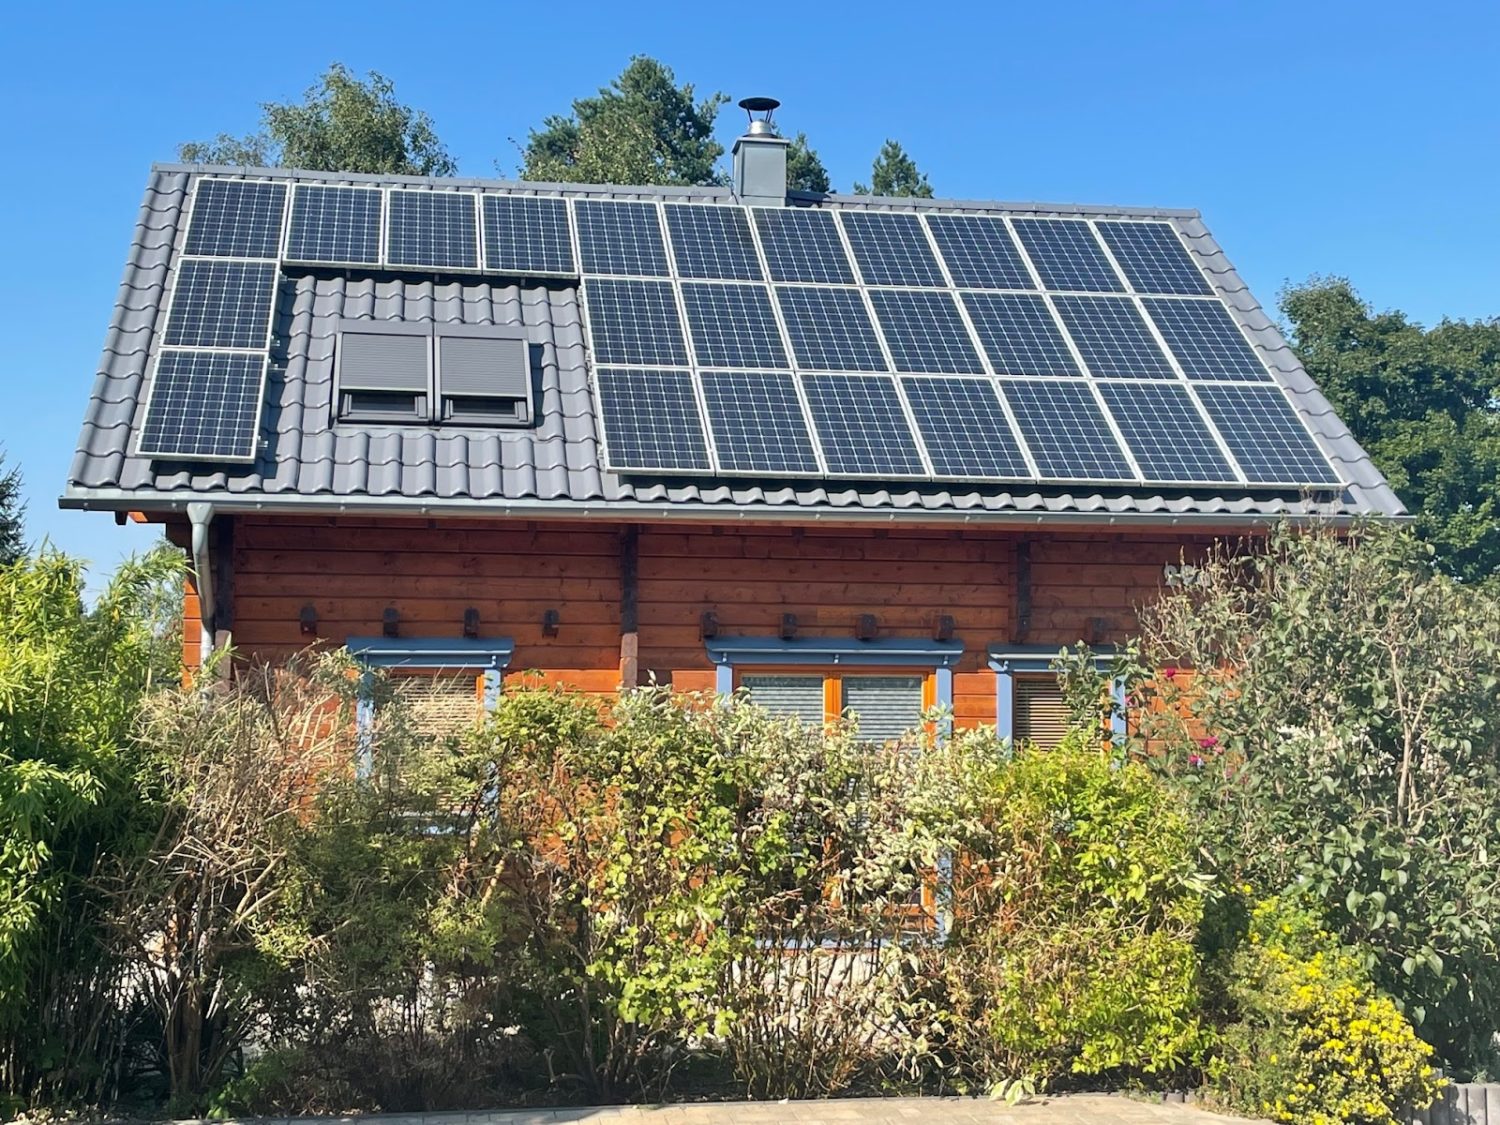 home in germany with solar panels on the roof